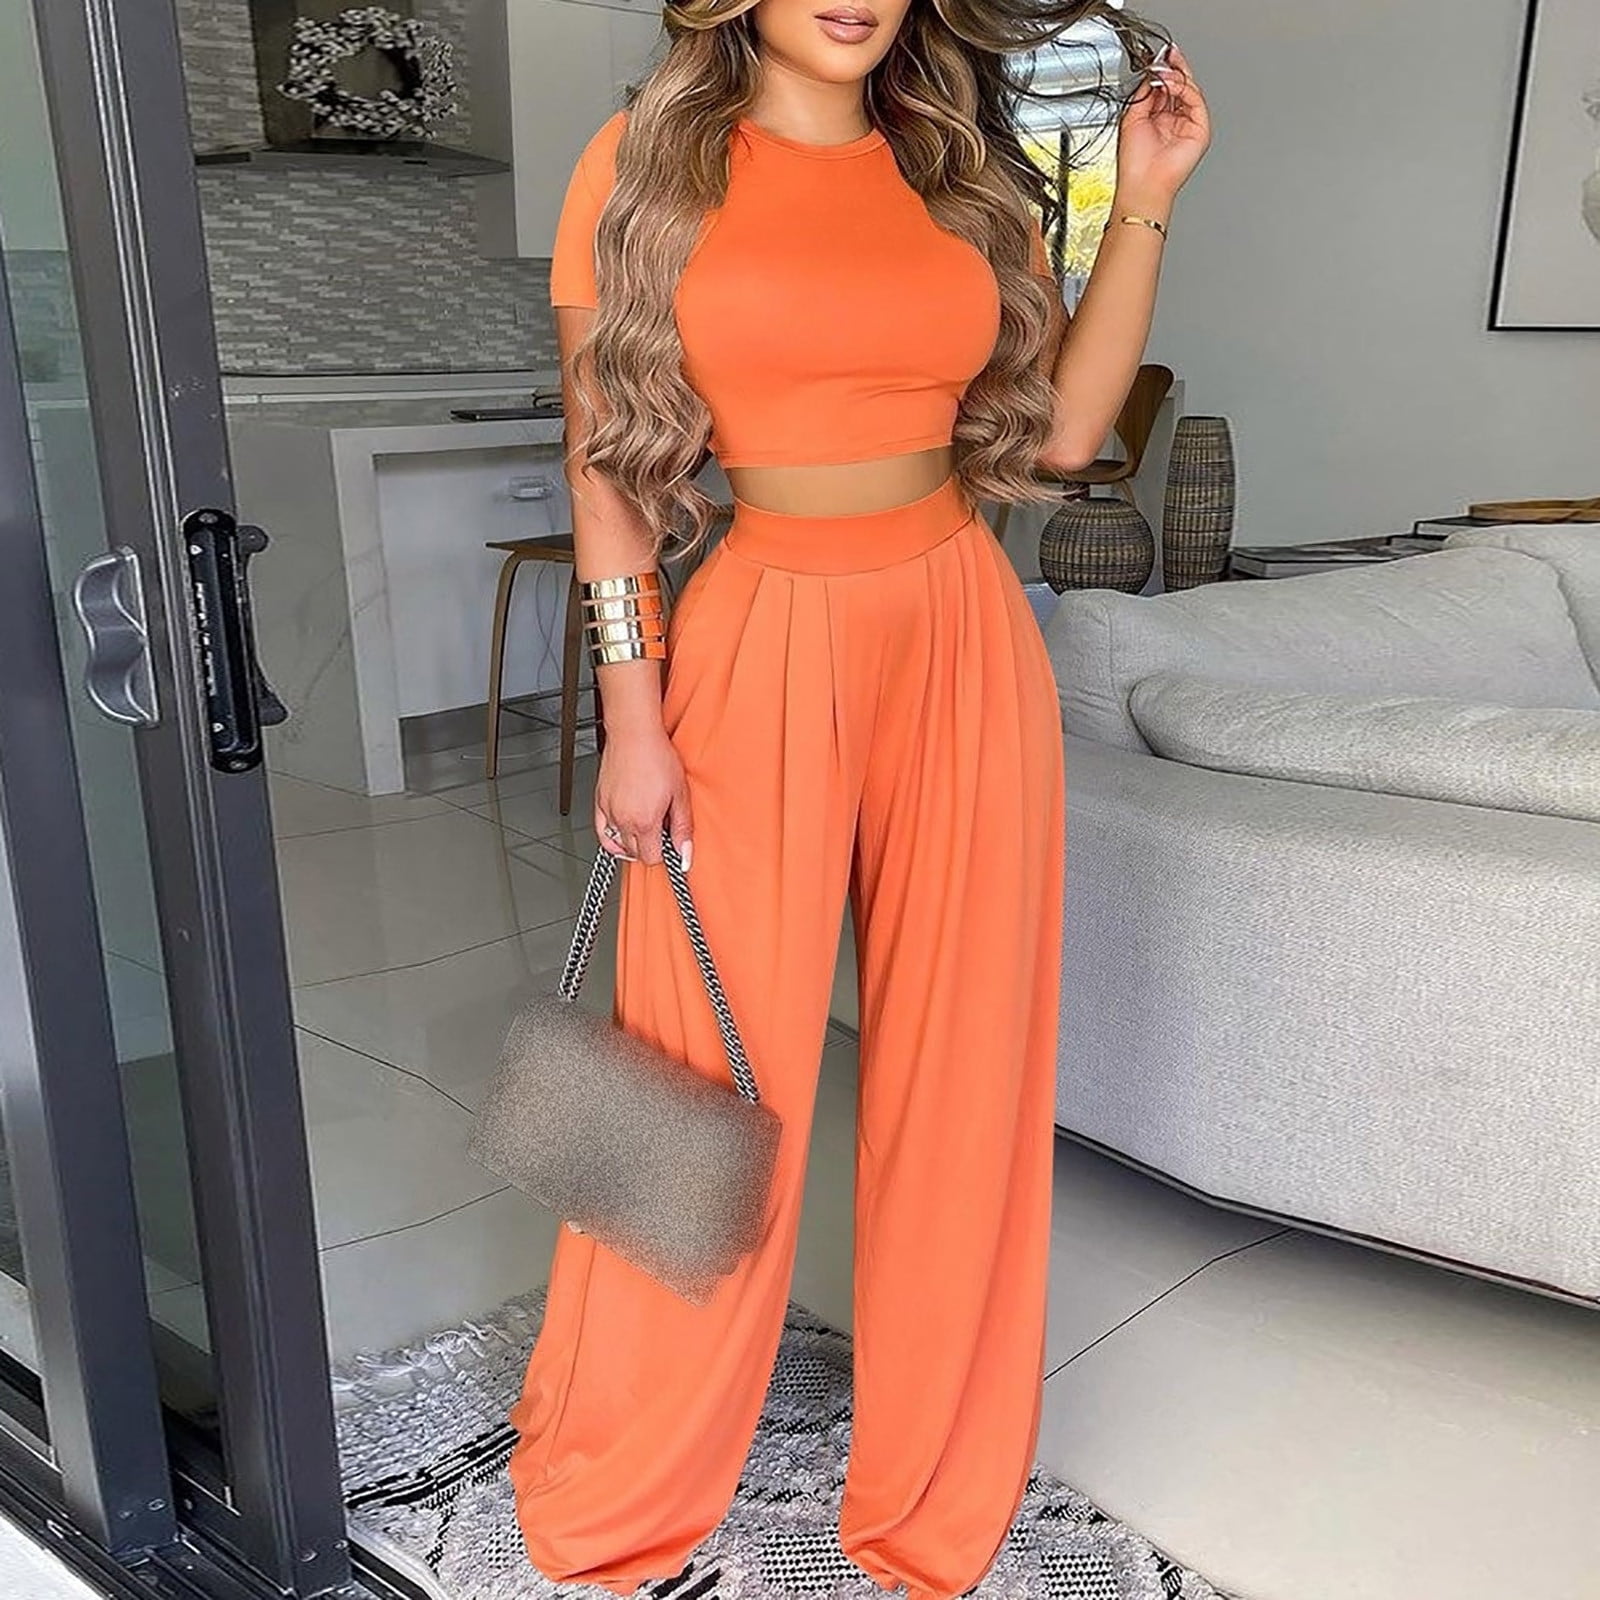 Leisure Fold Over Pants 2 Pieces Suit Women Autumn Crew Long Sleeve Slim  Crop Top Flare Pants Sports Causal Matching Set Outfit - AliExpress